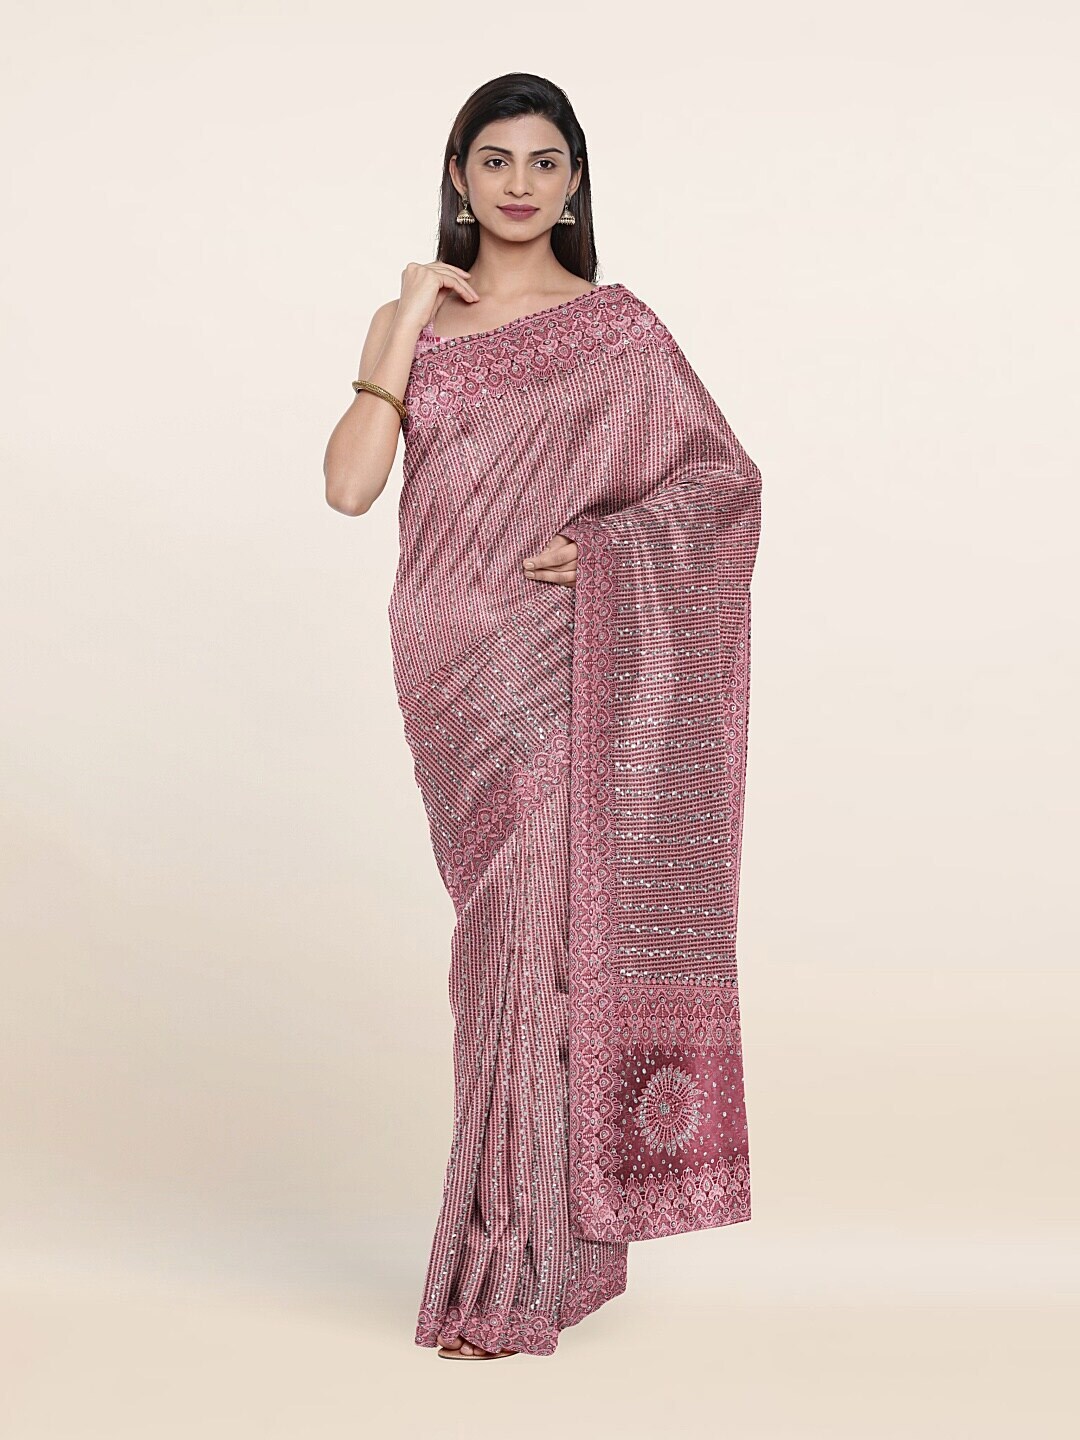 Pothys Pink Ethnic Motifs Sequinned Saree Price in India